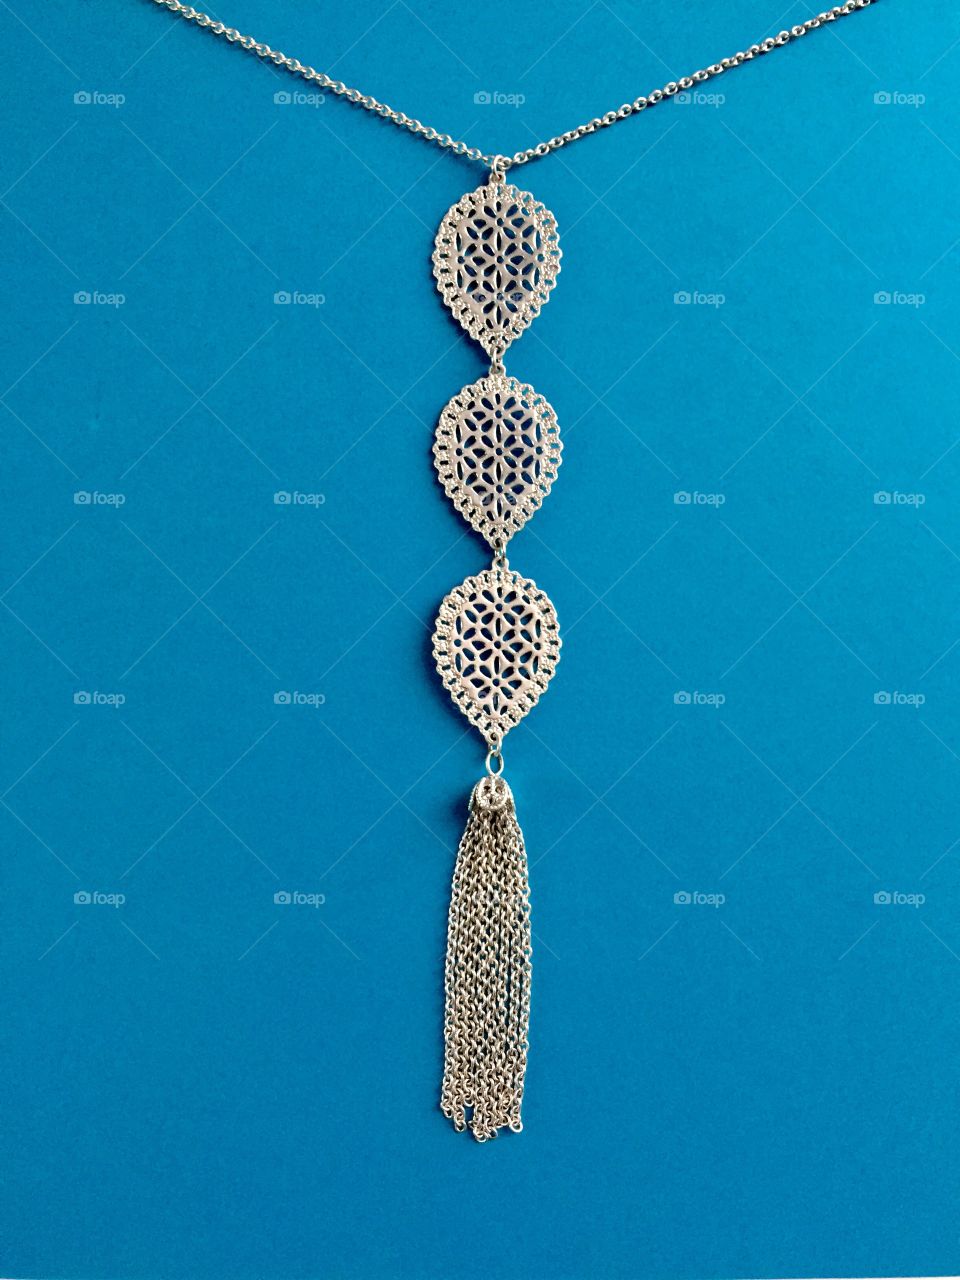 Close-up of tassel necklace hanging